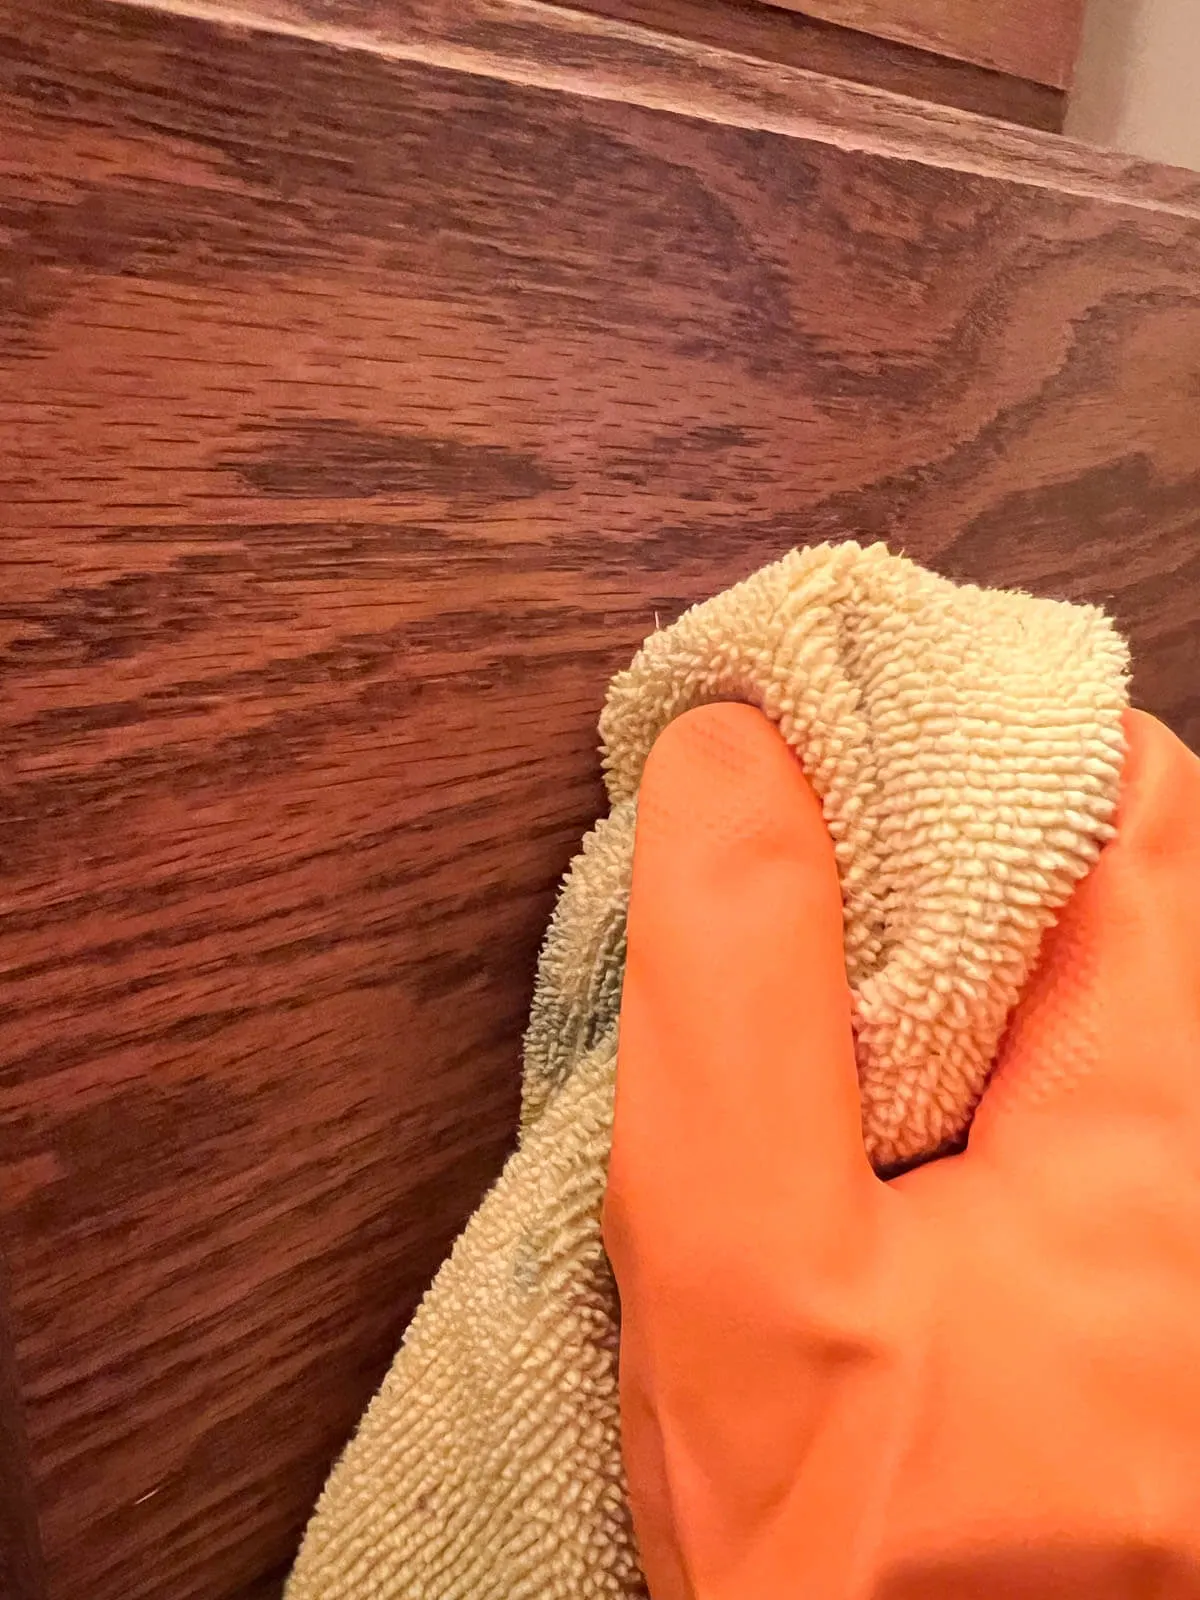 hand in orange rubber glove wiping oak cabinet with yellow rag.